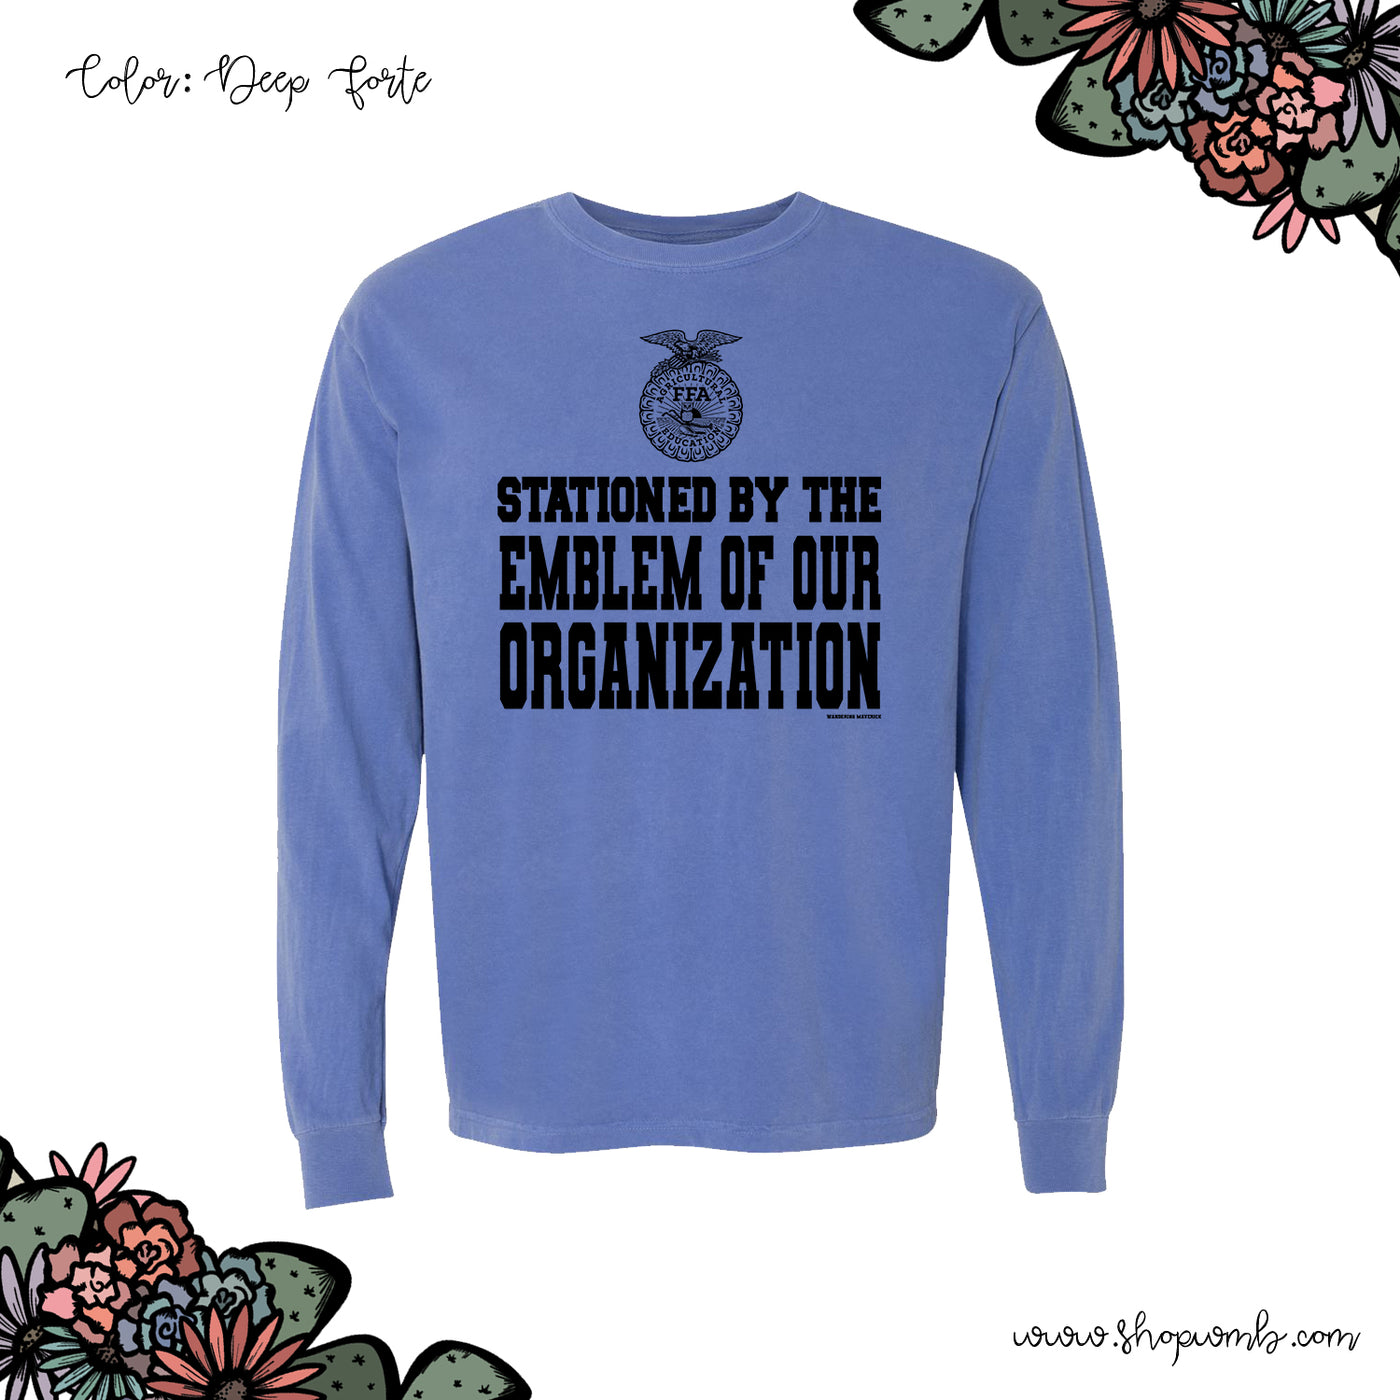 STATIONED BY THE EMBLEM OF OUR ORGANIZATION FFA LONG SLEEVE T-Shirt (S-3XL) - Multiple Colors!